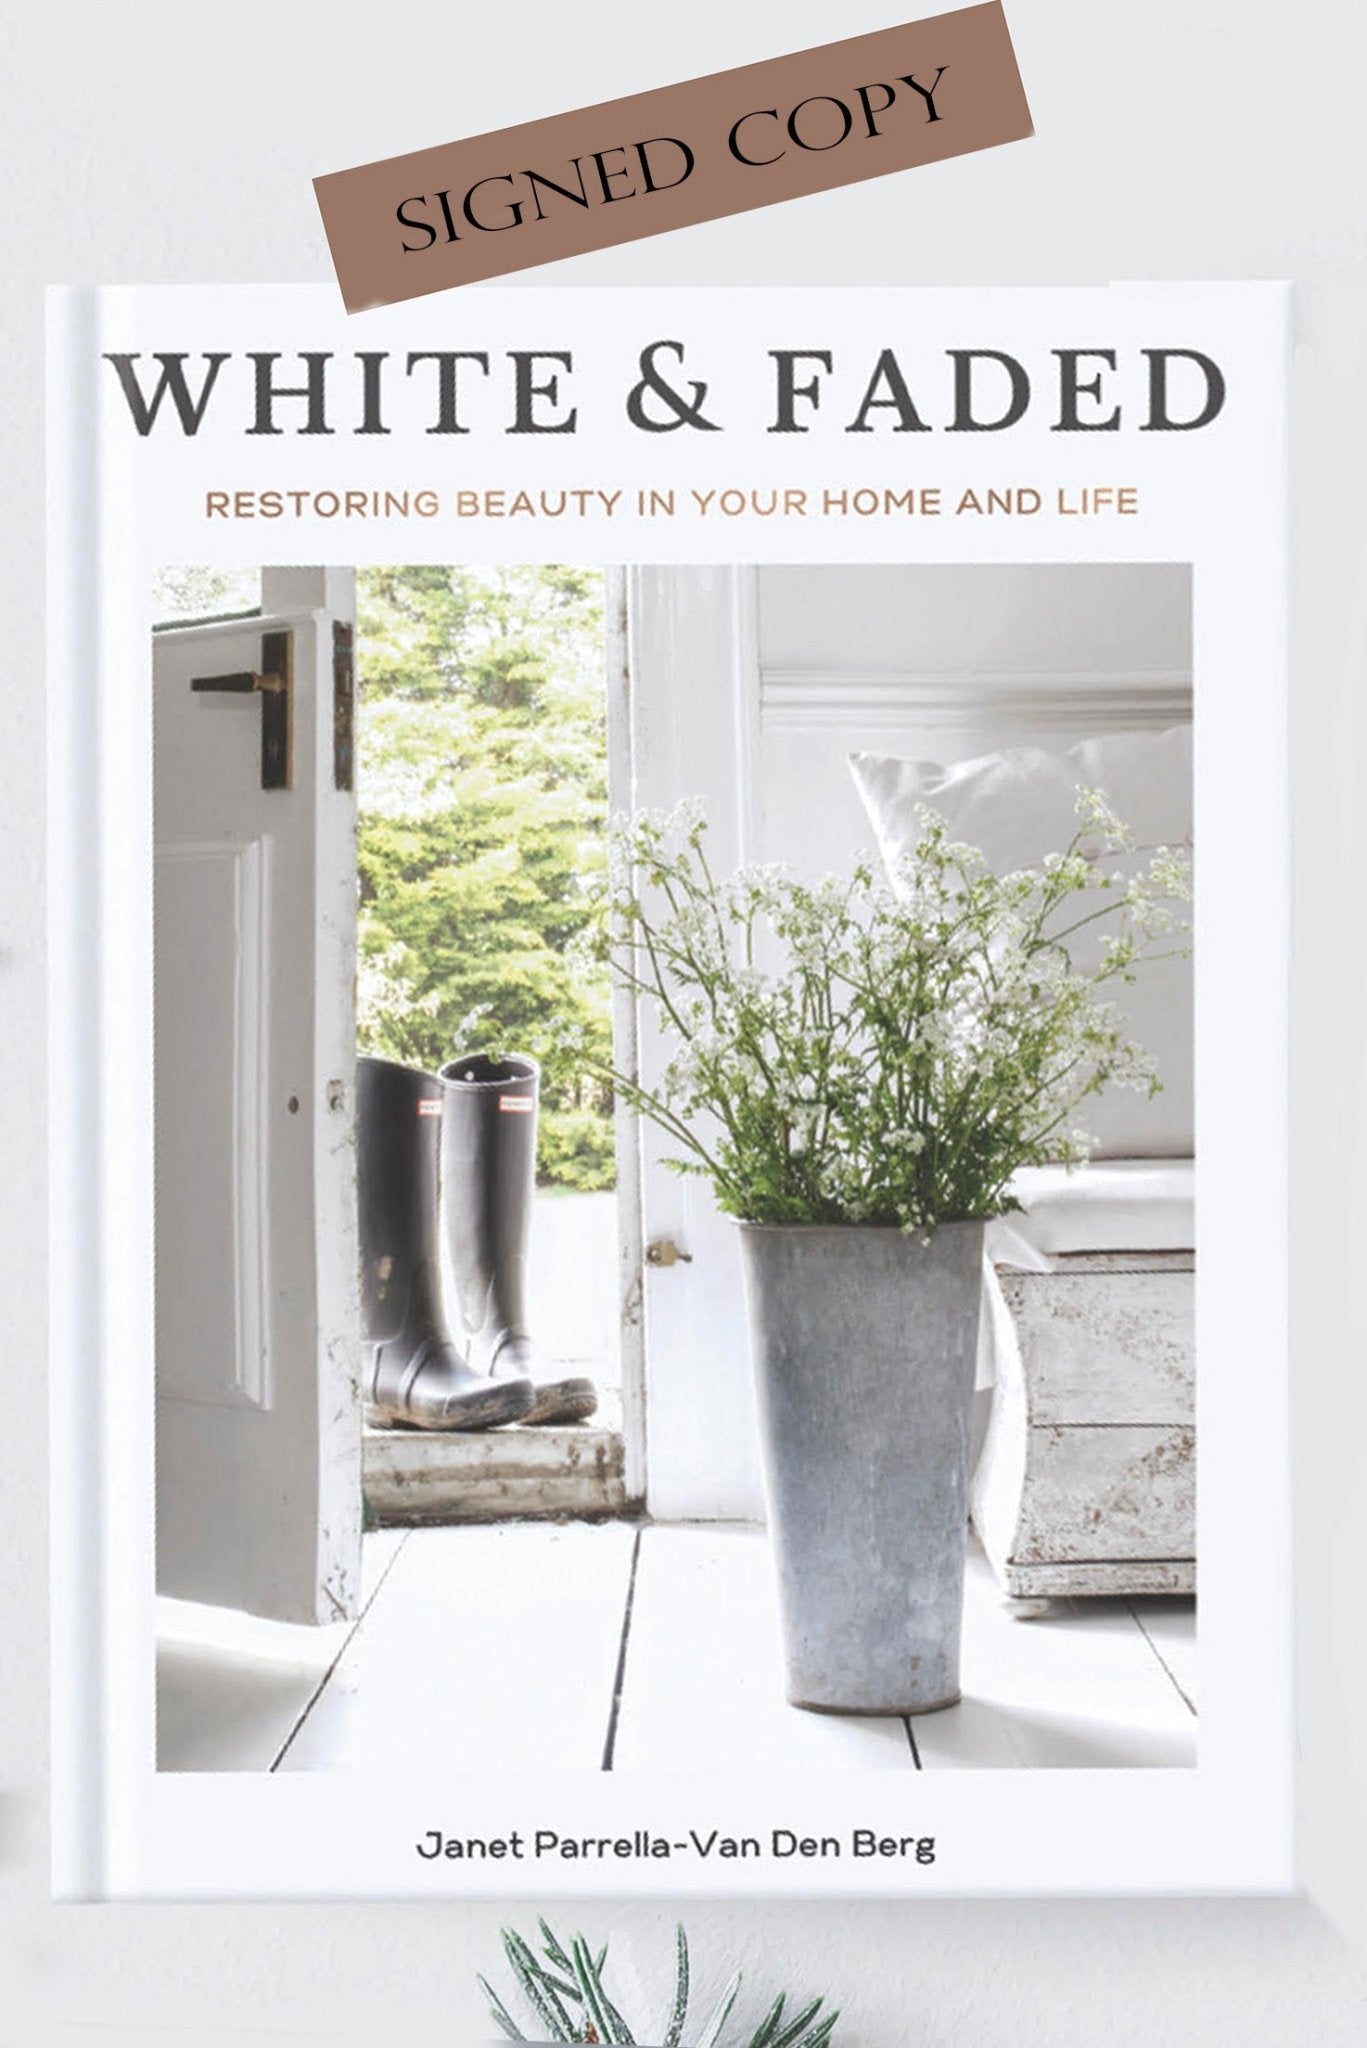 White & Faded; Restoring Beauty in you Home and Life - SIGNED COPY - White & Faded